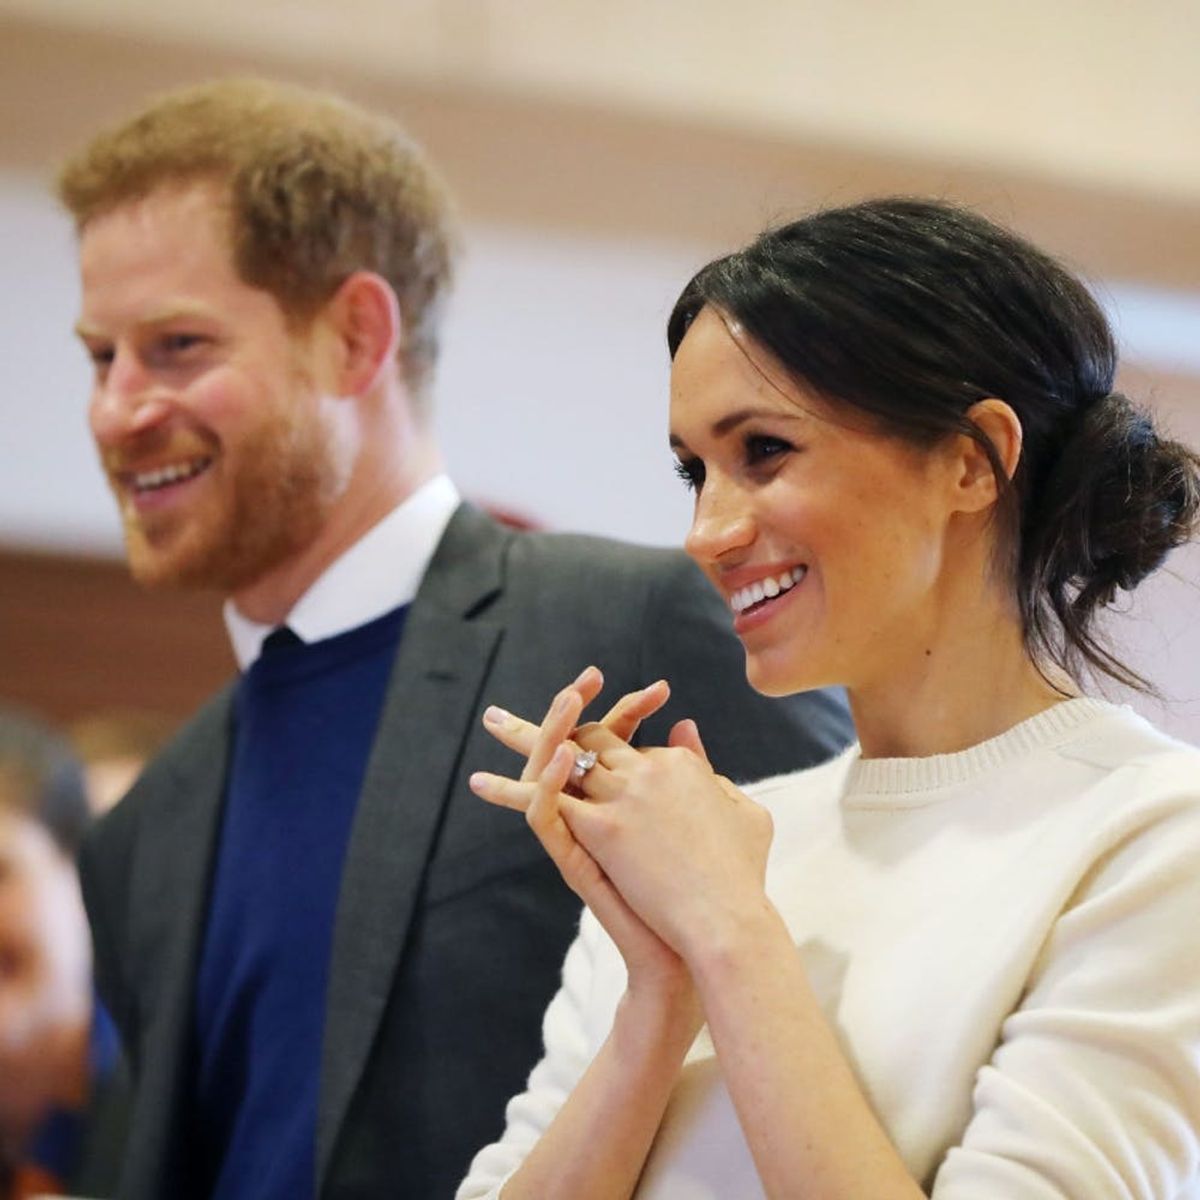 7 Royal Traditions to Expect at Prince Harry and Megan Markle’s Wedding